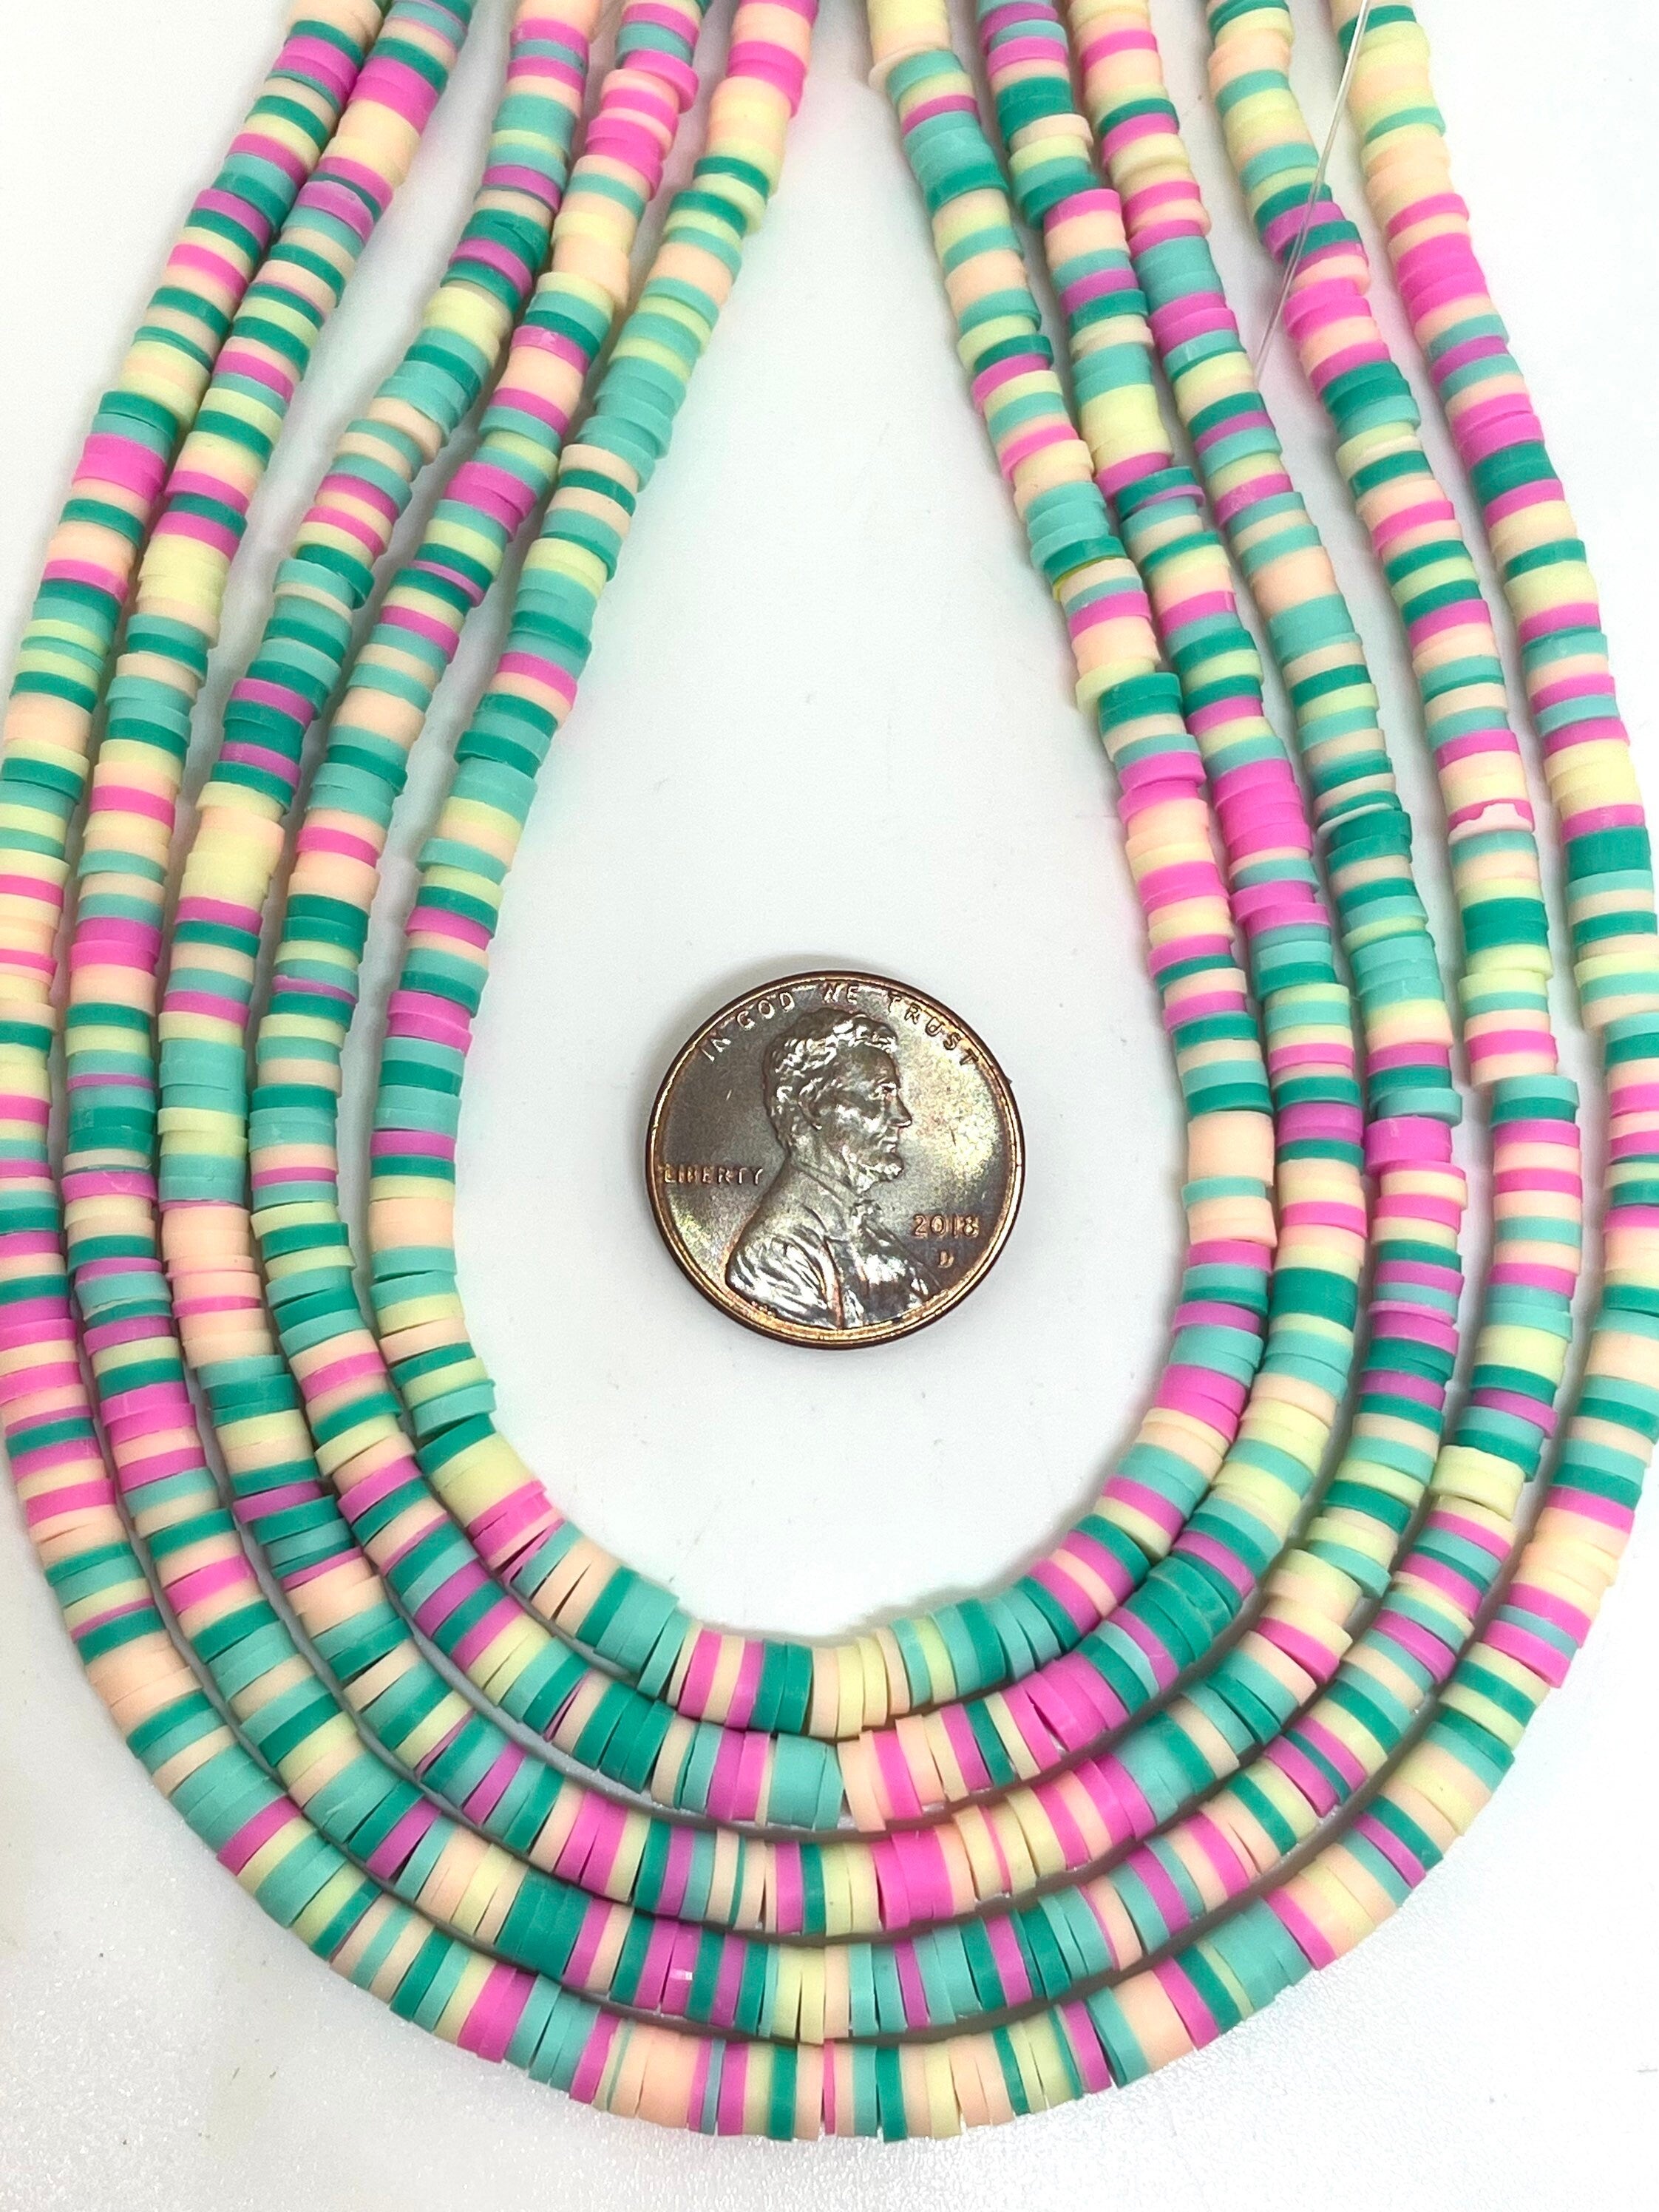 Mini Pastel Heishi Beads, Tropical Themed Necklace, Bead Set for Jewel